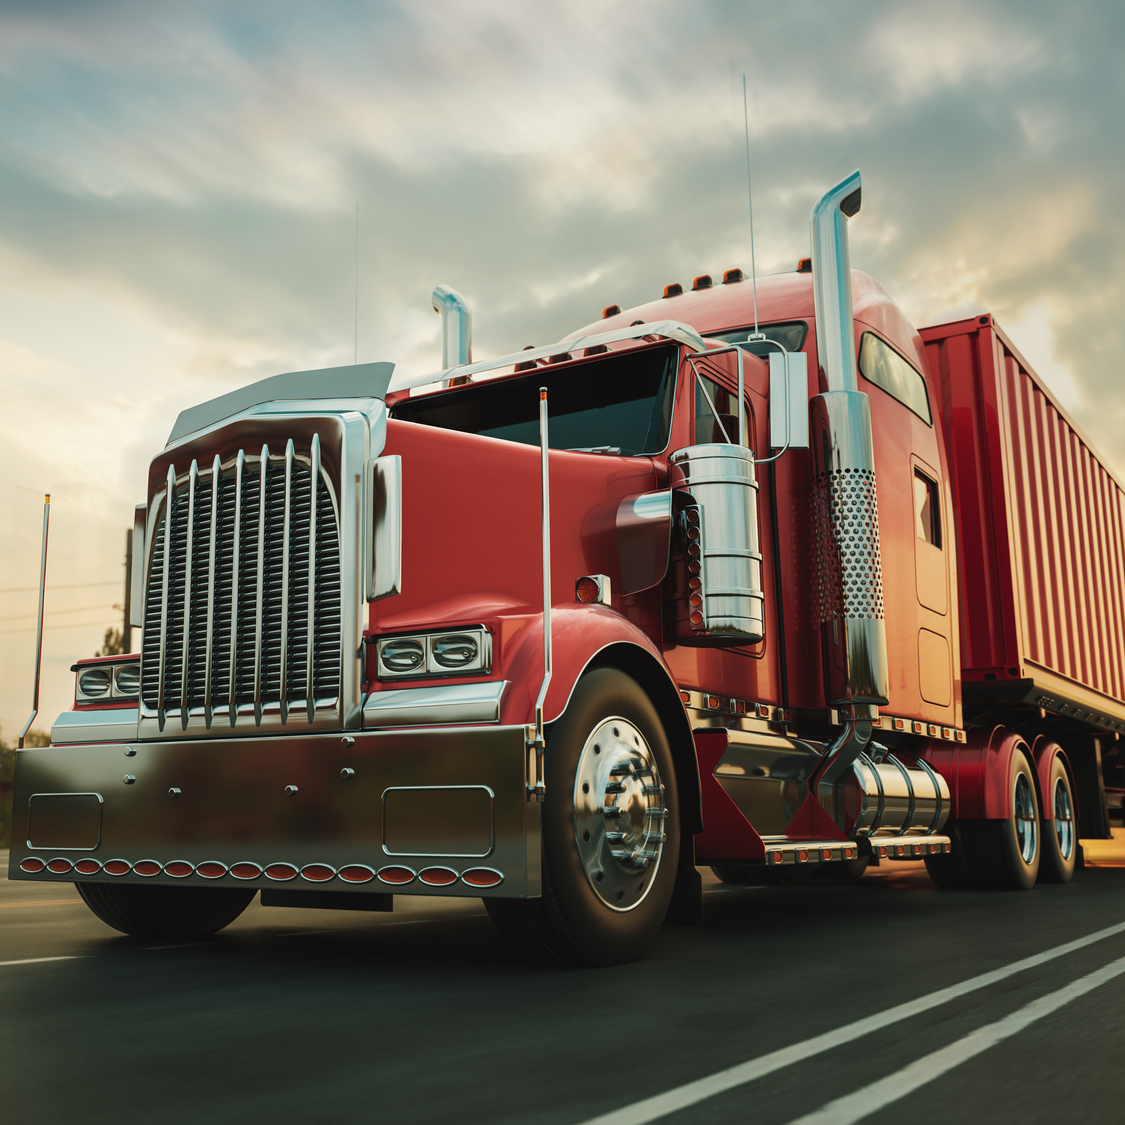 National Trucking Company Maintains Consistent Recruiting With Geofencing Marketing